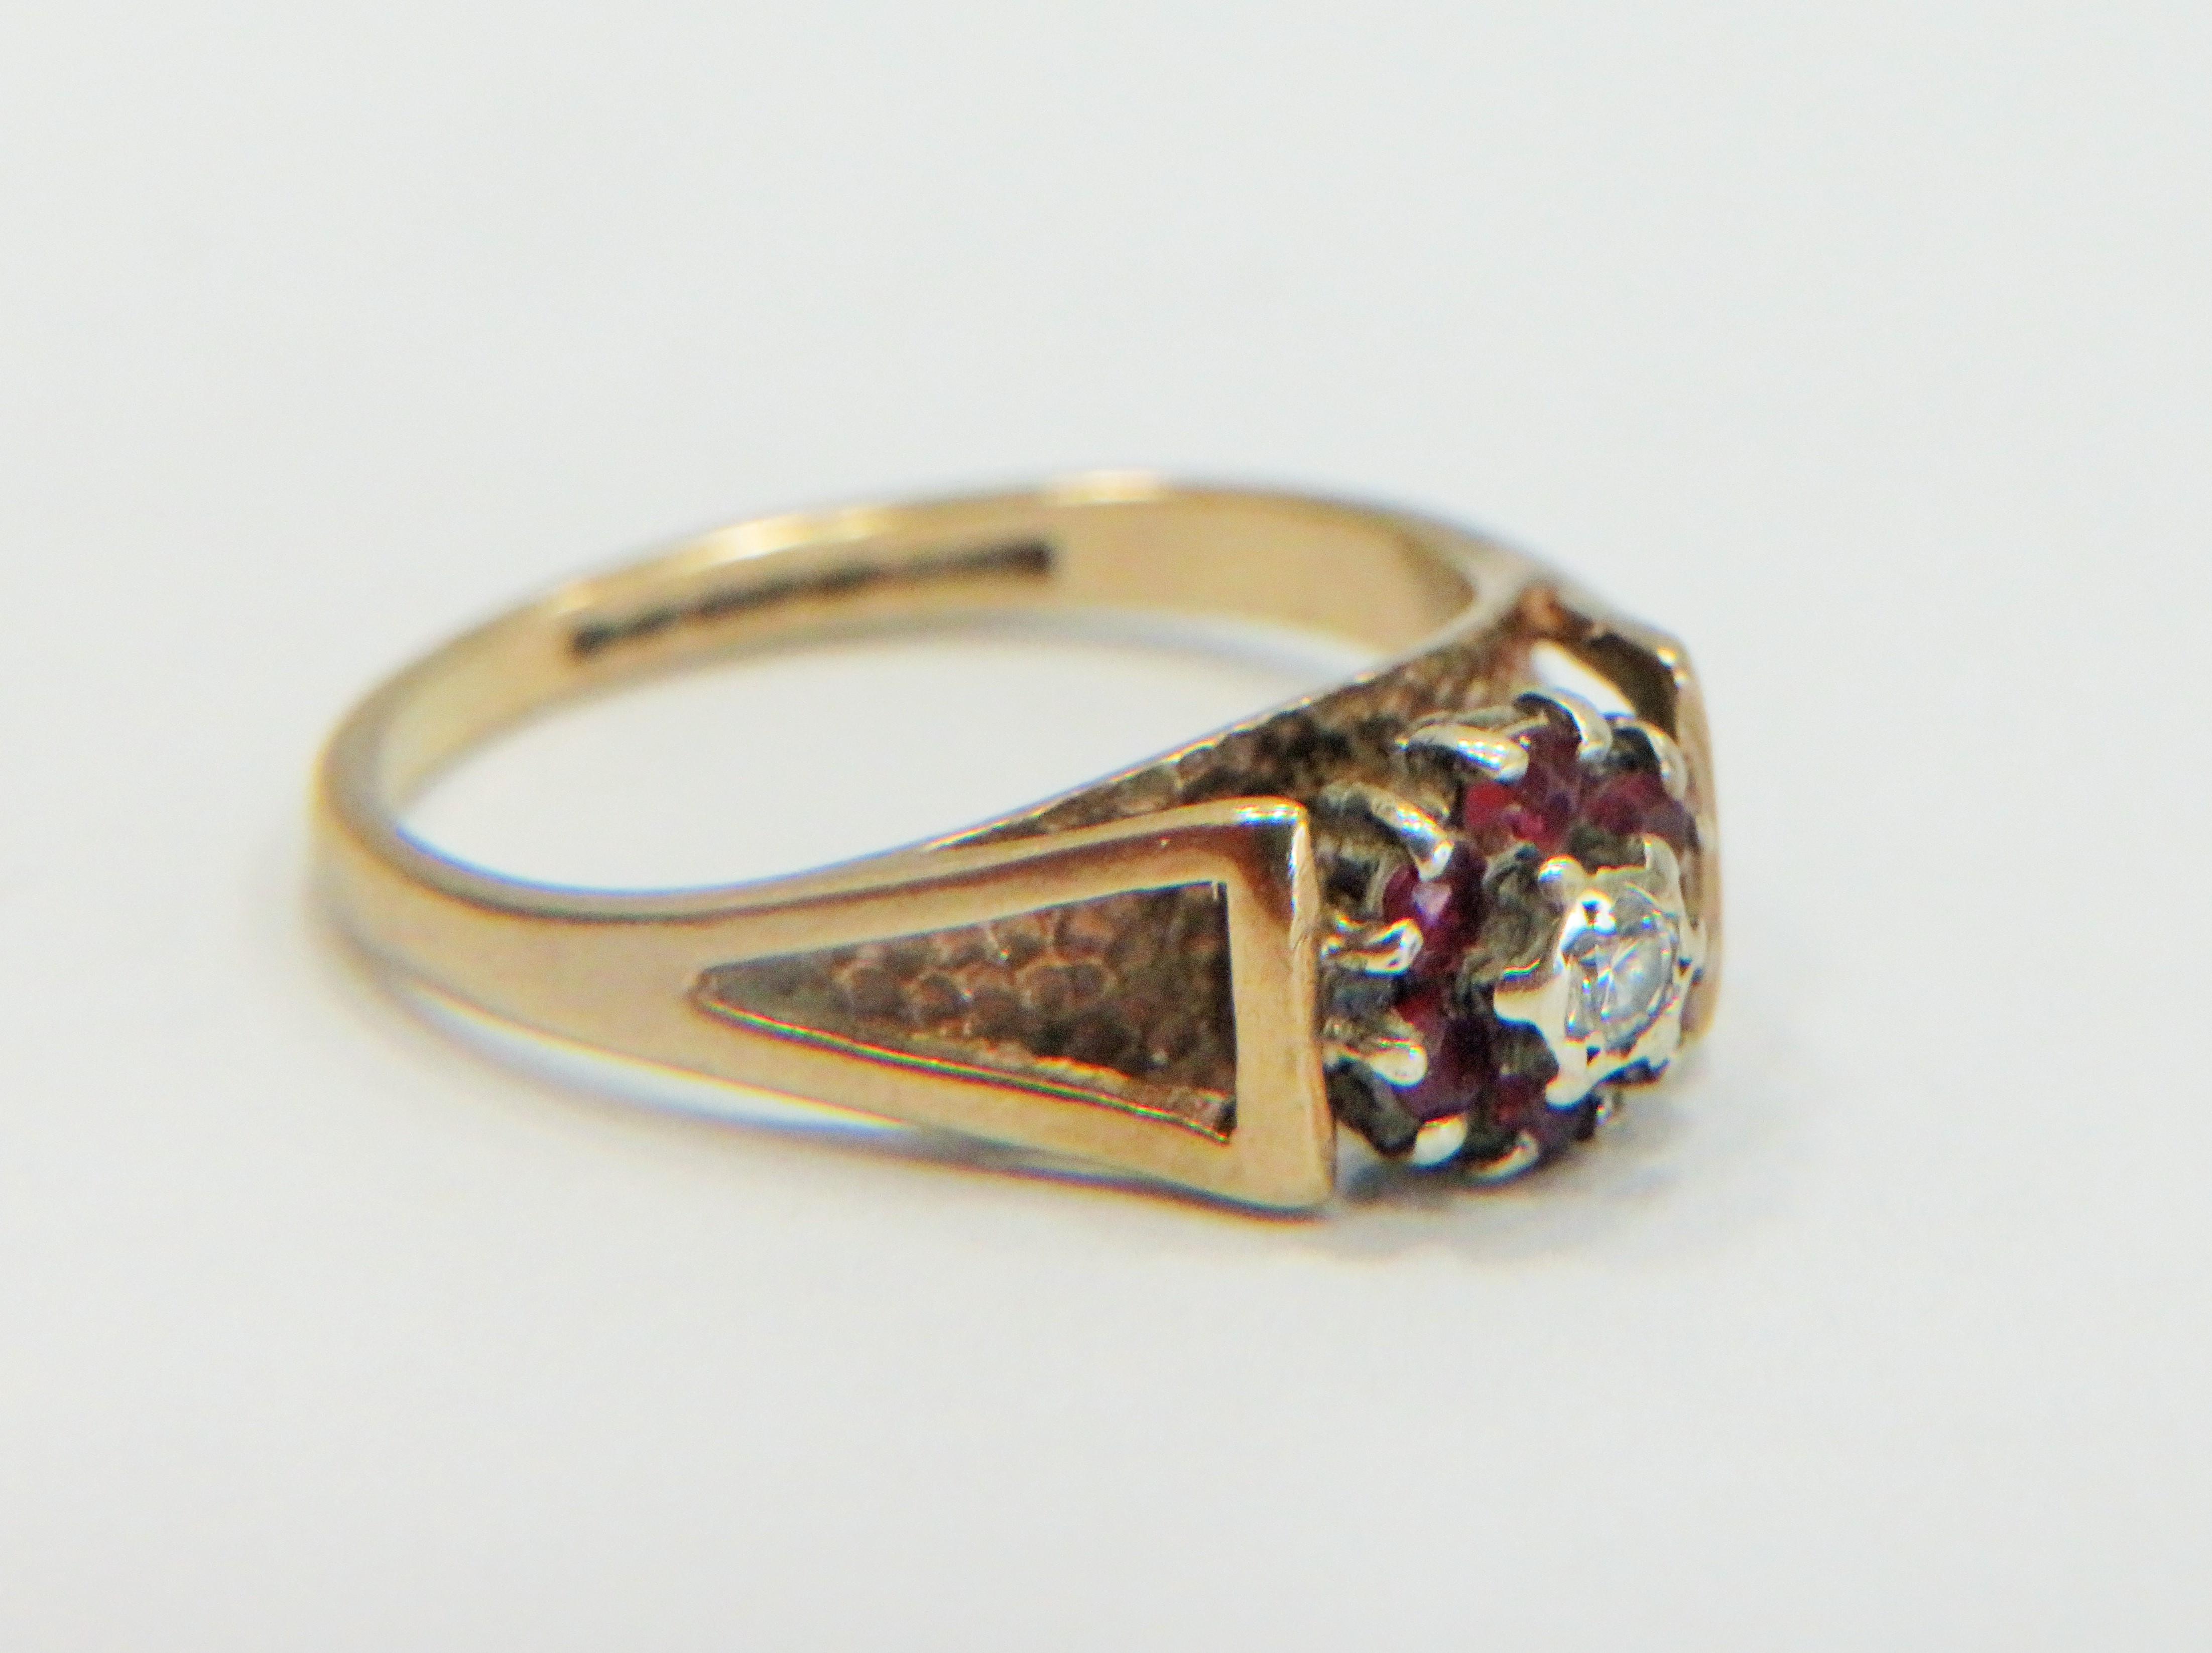 9ct Yellow Gold Ring set with a small central Diamond, surrounded by small Rubies. Small finger size - Image 2 of 3